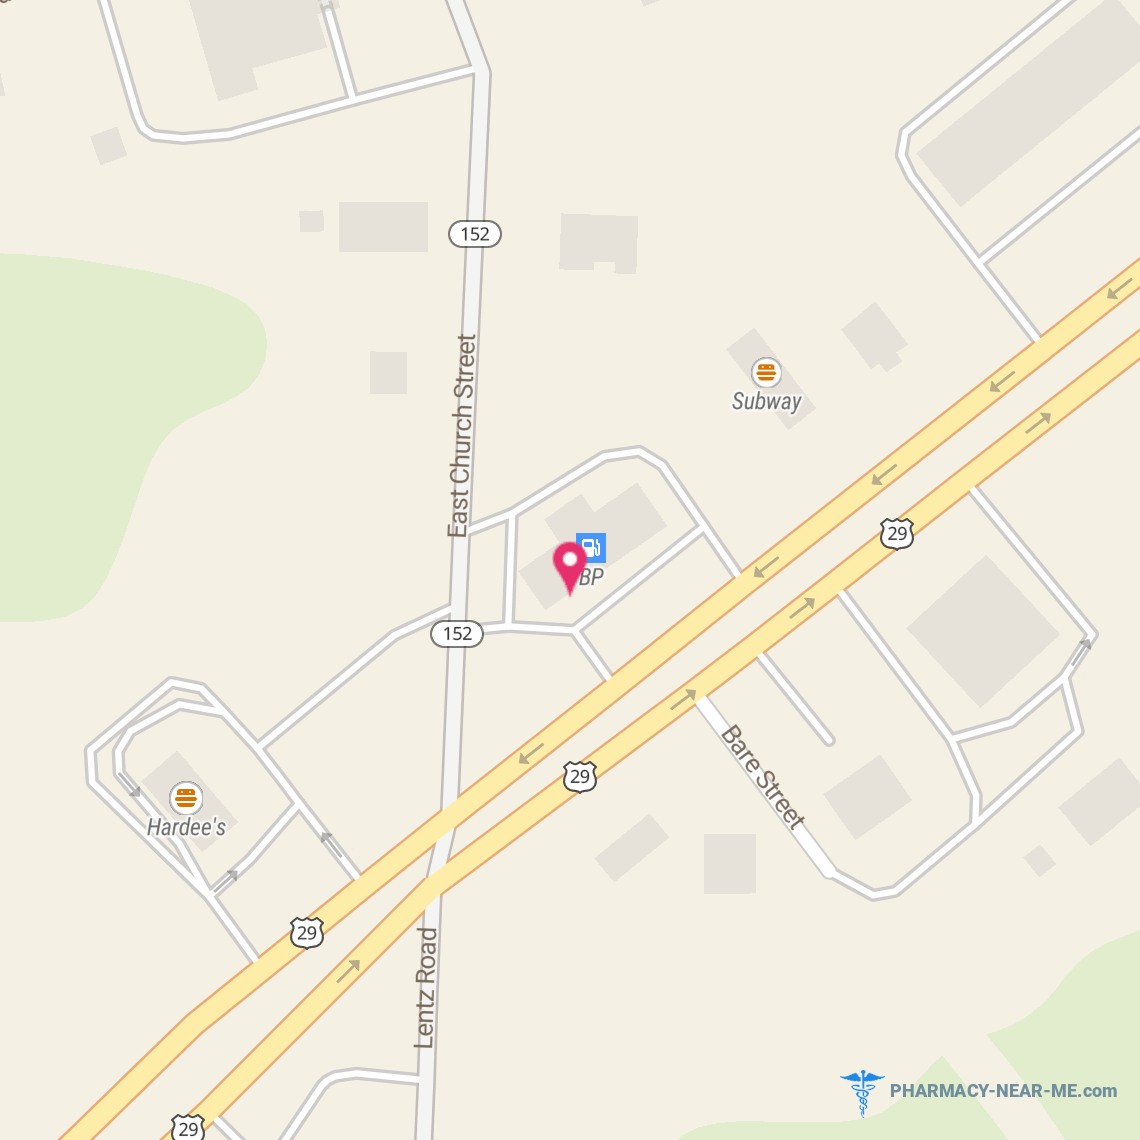 JP AND F INC - Pharmacy Hours, Phone, Reviews & Information: Highway 29 N, China Grove, North Carolina 28023, United States